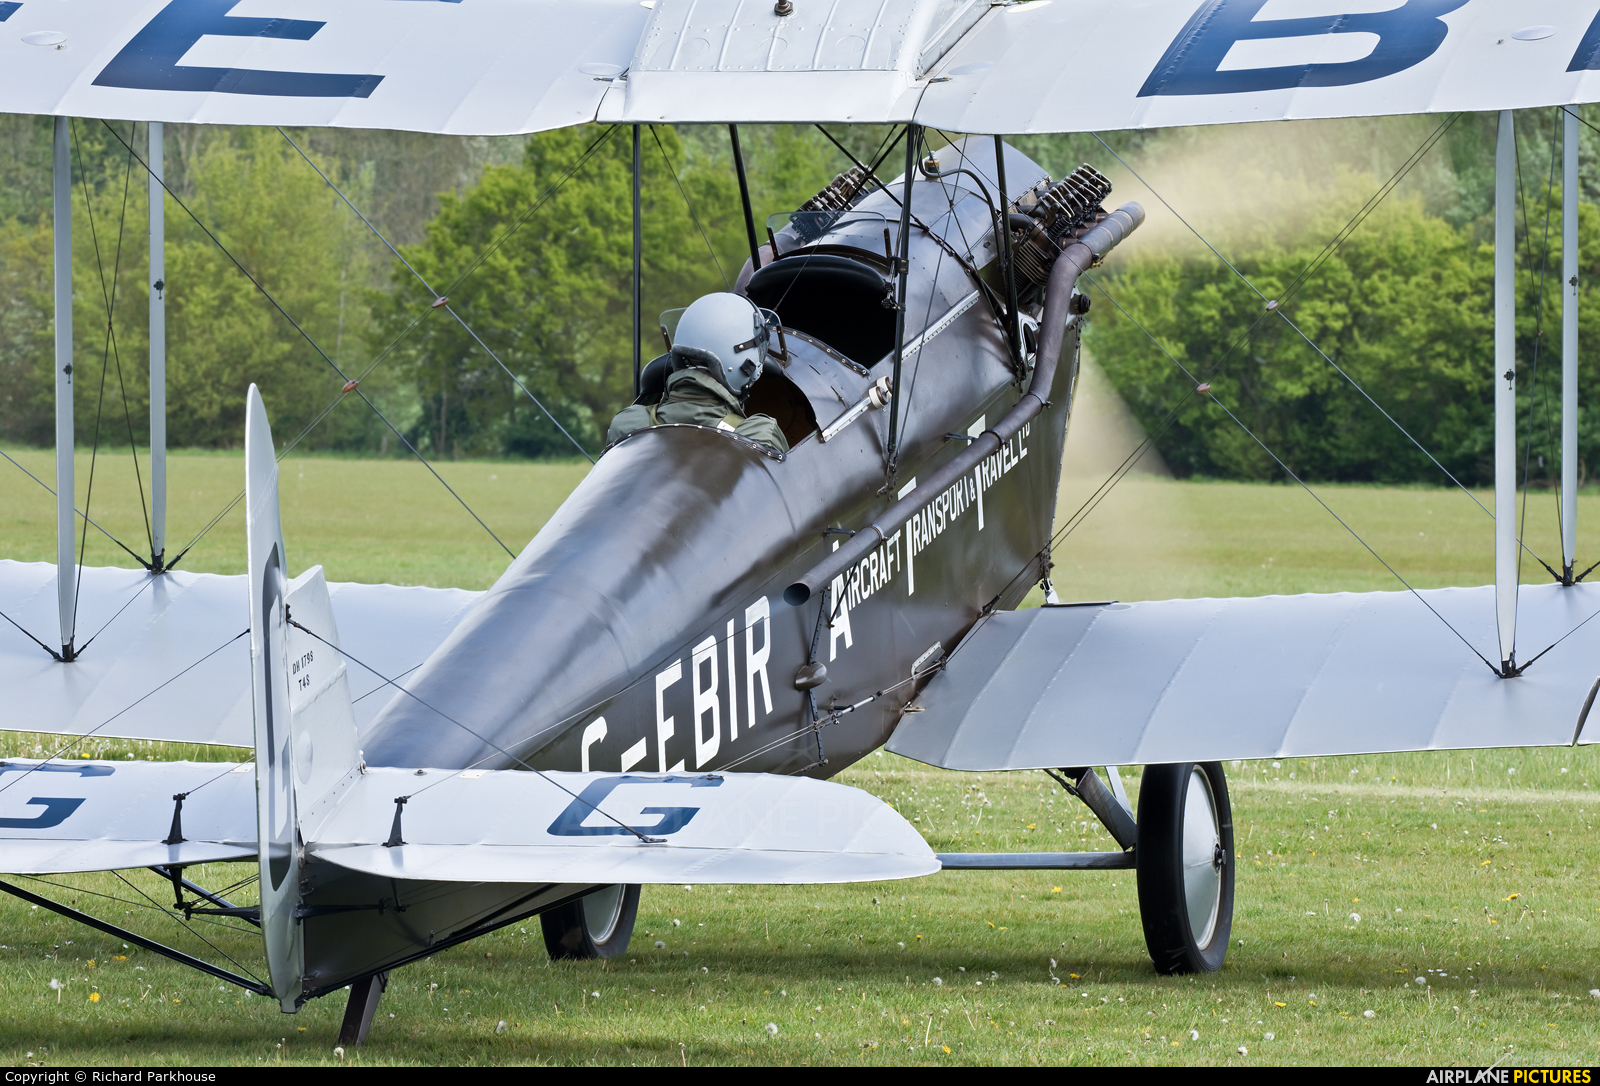 The Shuttleworth Collection G-EBIR aircraft at Old Warden